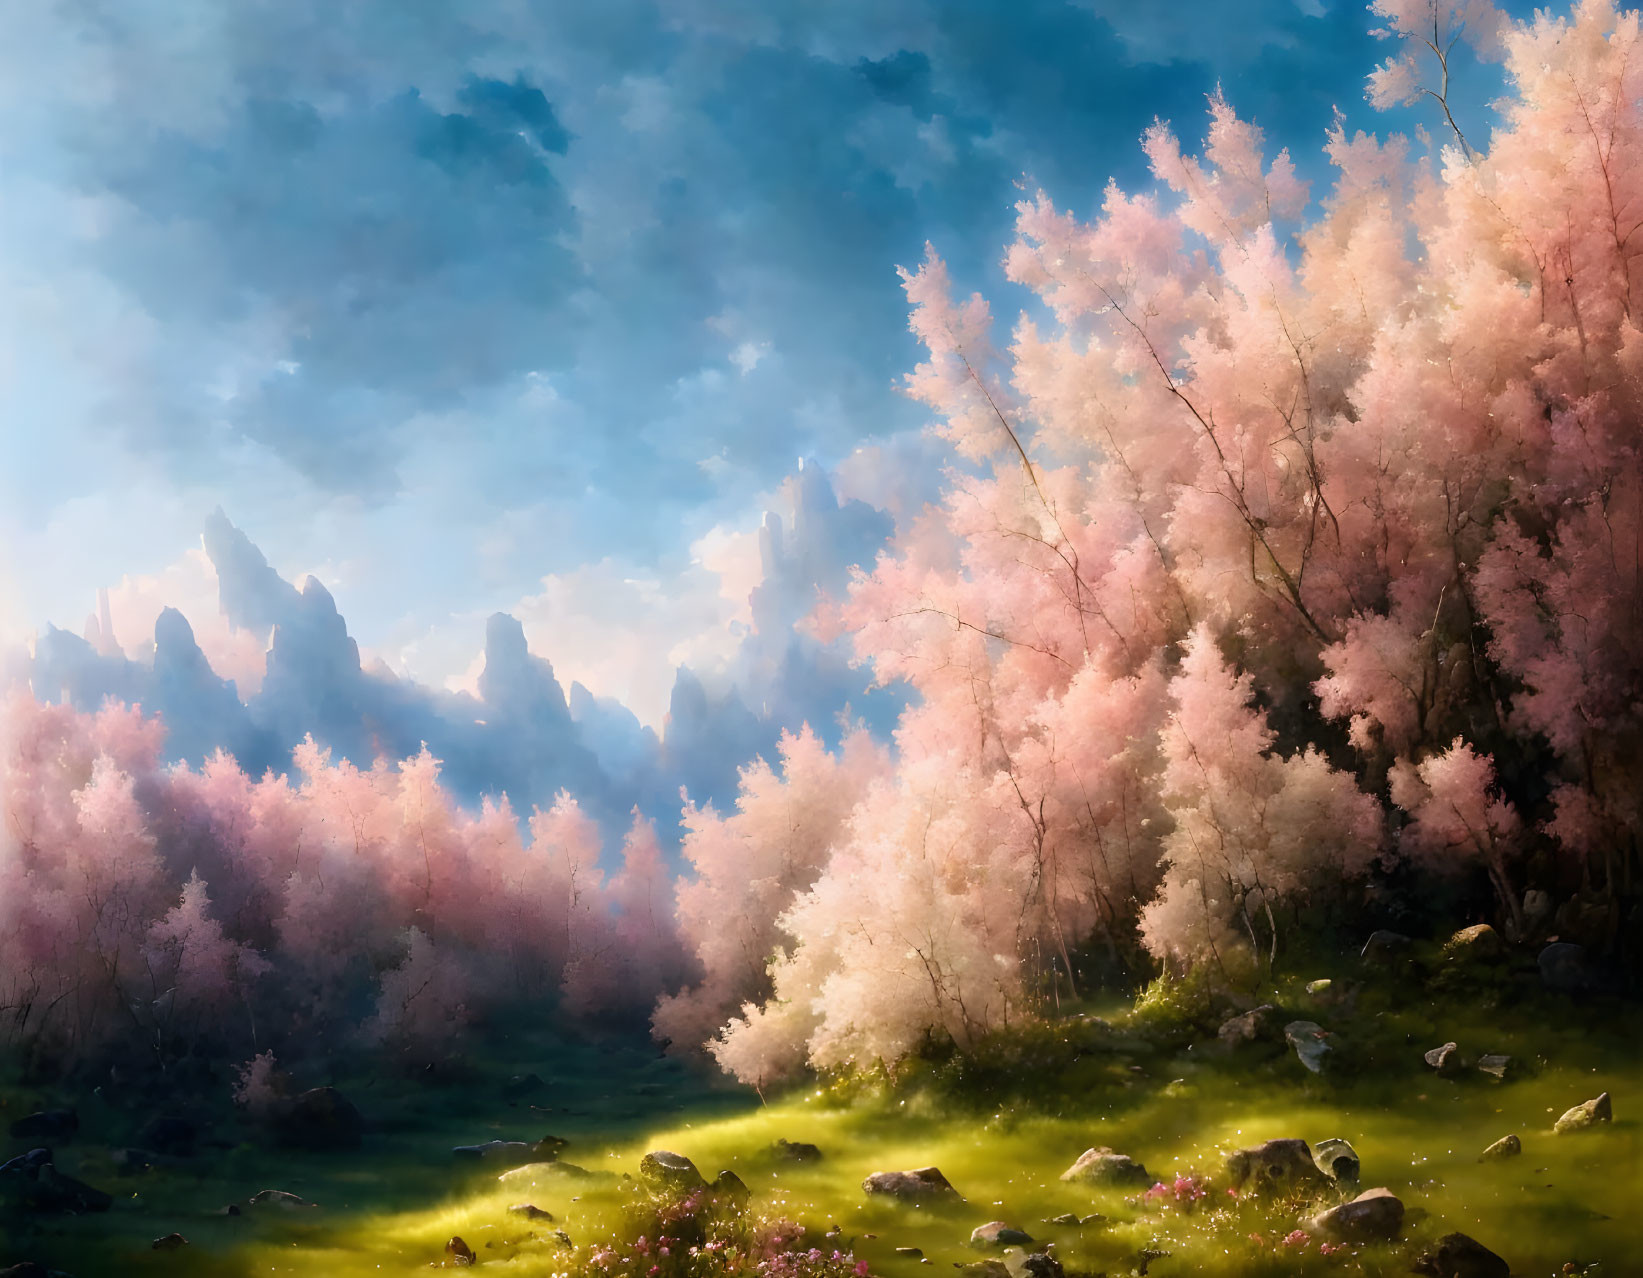 Tranquil Landscape with Cherry Trees, Rocks, and Misty Mountains